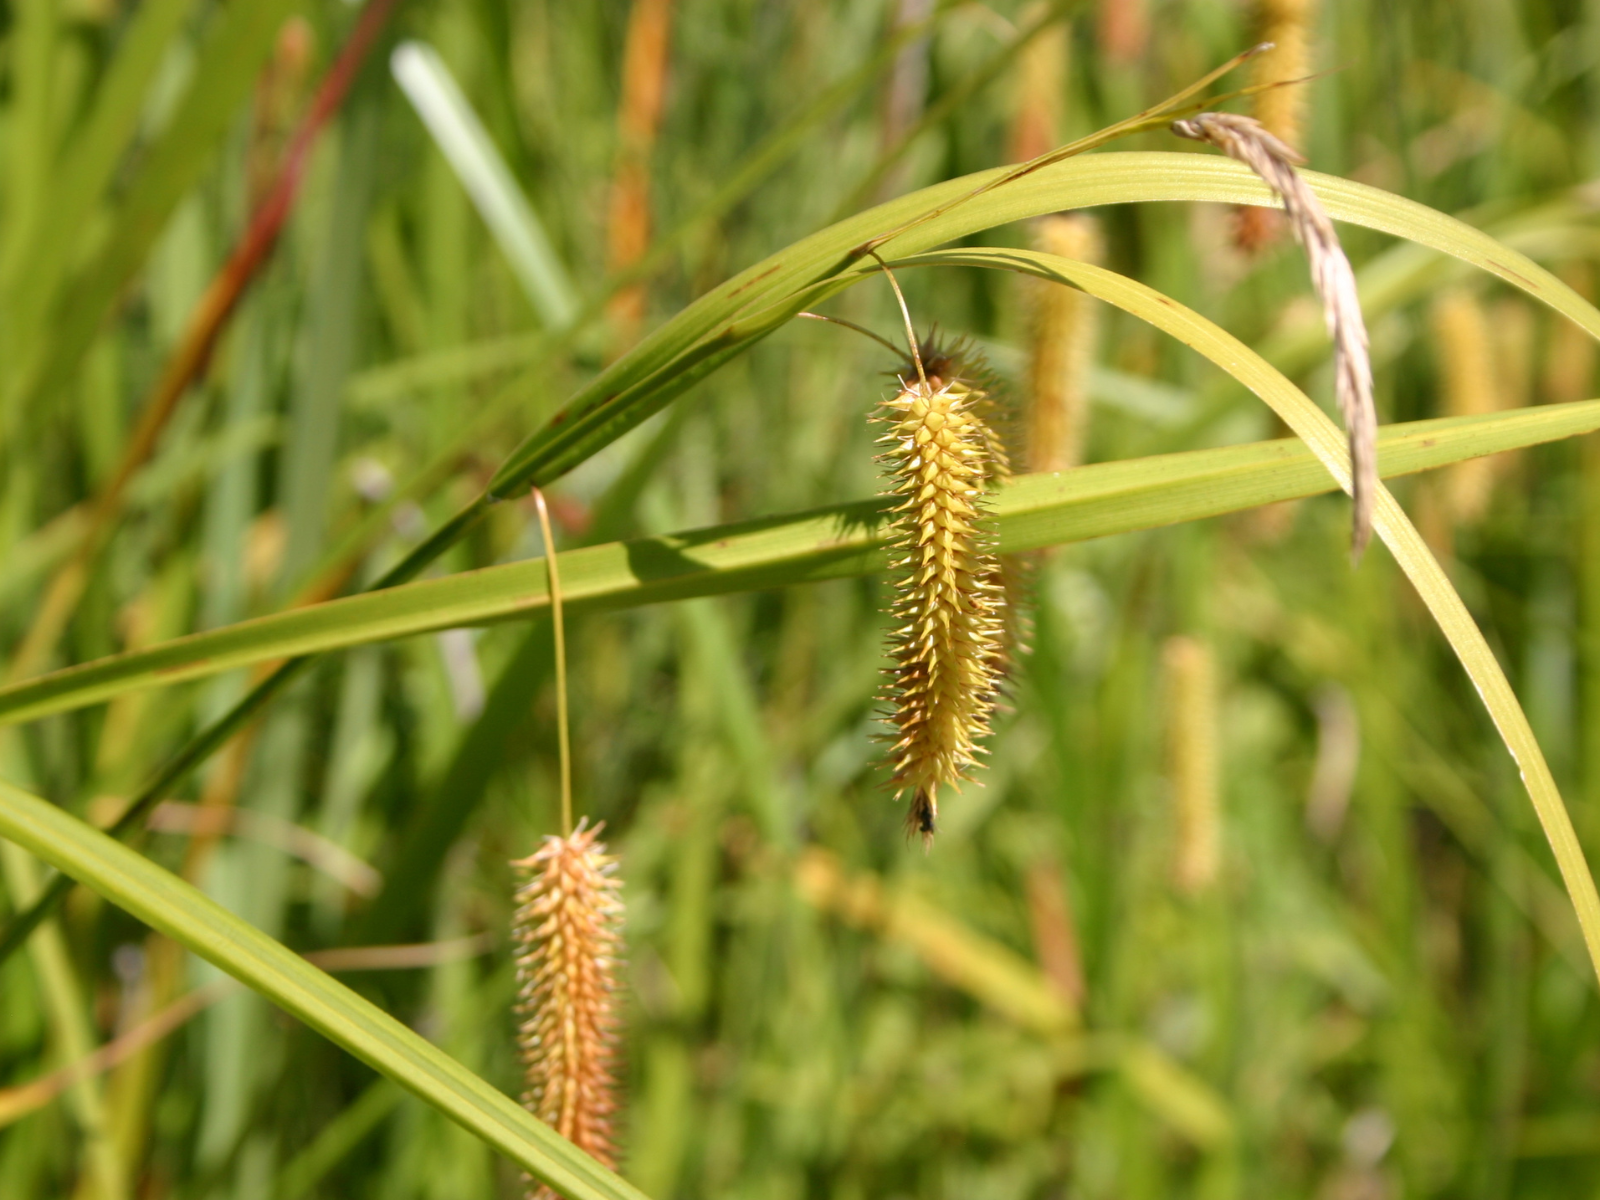 Close up on a spikey pod growing from a stalk of grass (Carex).